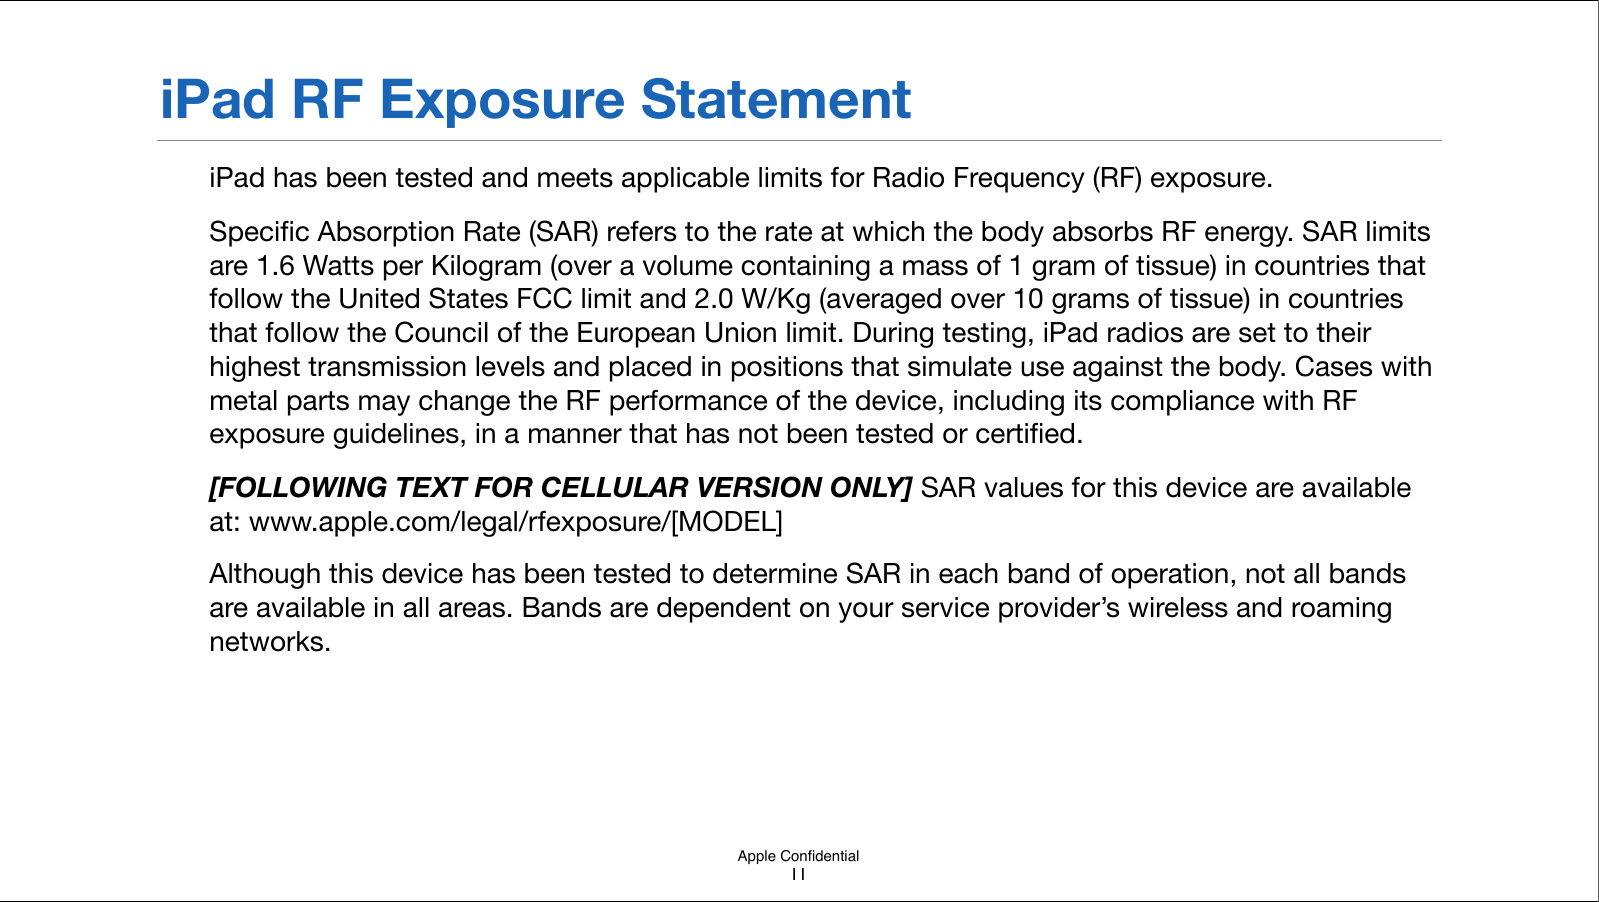 Apple ConﬁdentialiPad RF Exposure StatementiPad has been tested and meets applicable limits for Radio Frequency (RF) exposure.Speciﬁc Absorption Rate (SAR) refers to the rate at which the body absorbs RF energy. SAR limits are 1.6 Watts per Kilogram (over a volume containing a mass of 1 gram of tissue) in countries that follow the United States FCC limit and 2.0 W/Kg (averaged over 10 grams of tissue) in countries that follow the Council of the European Union limit. During testing, iPad radios are set to their highest transmission levels and placed in positions that simulate use against the body. Cases with metal parts may change the RF performance of the device, including its compliance with RF exposure guidelines, in a manner that has not been!tested or certiﬁed.[FOLLOWING TEXT FOR CELLULAR VERSION ONLY] SAR values for this device are available at: www.apple.com/legal/rfexposure/[MODEL]Although this device has been tested to determine SAR in each band of operation, not all bands are available in all areas. Bands are dependent on your service provider’s wireless and roaming networks.  11